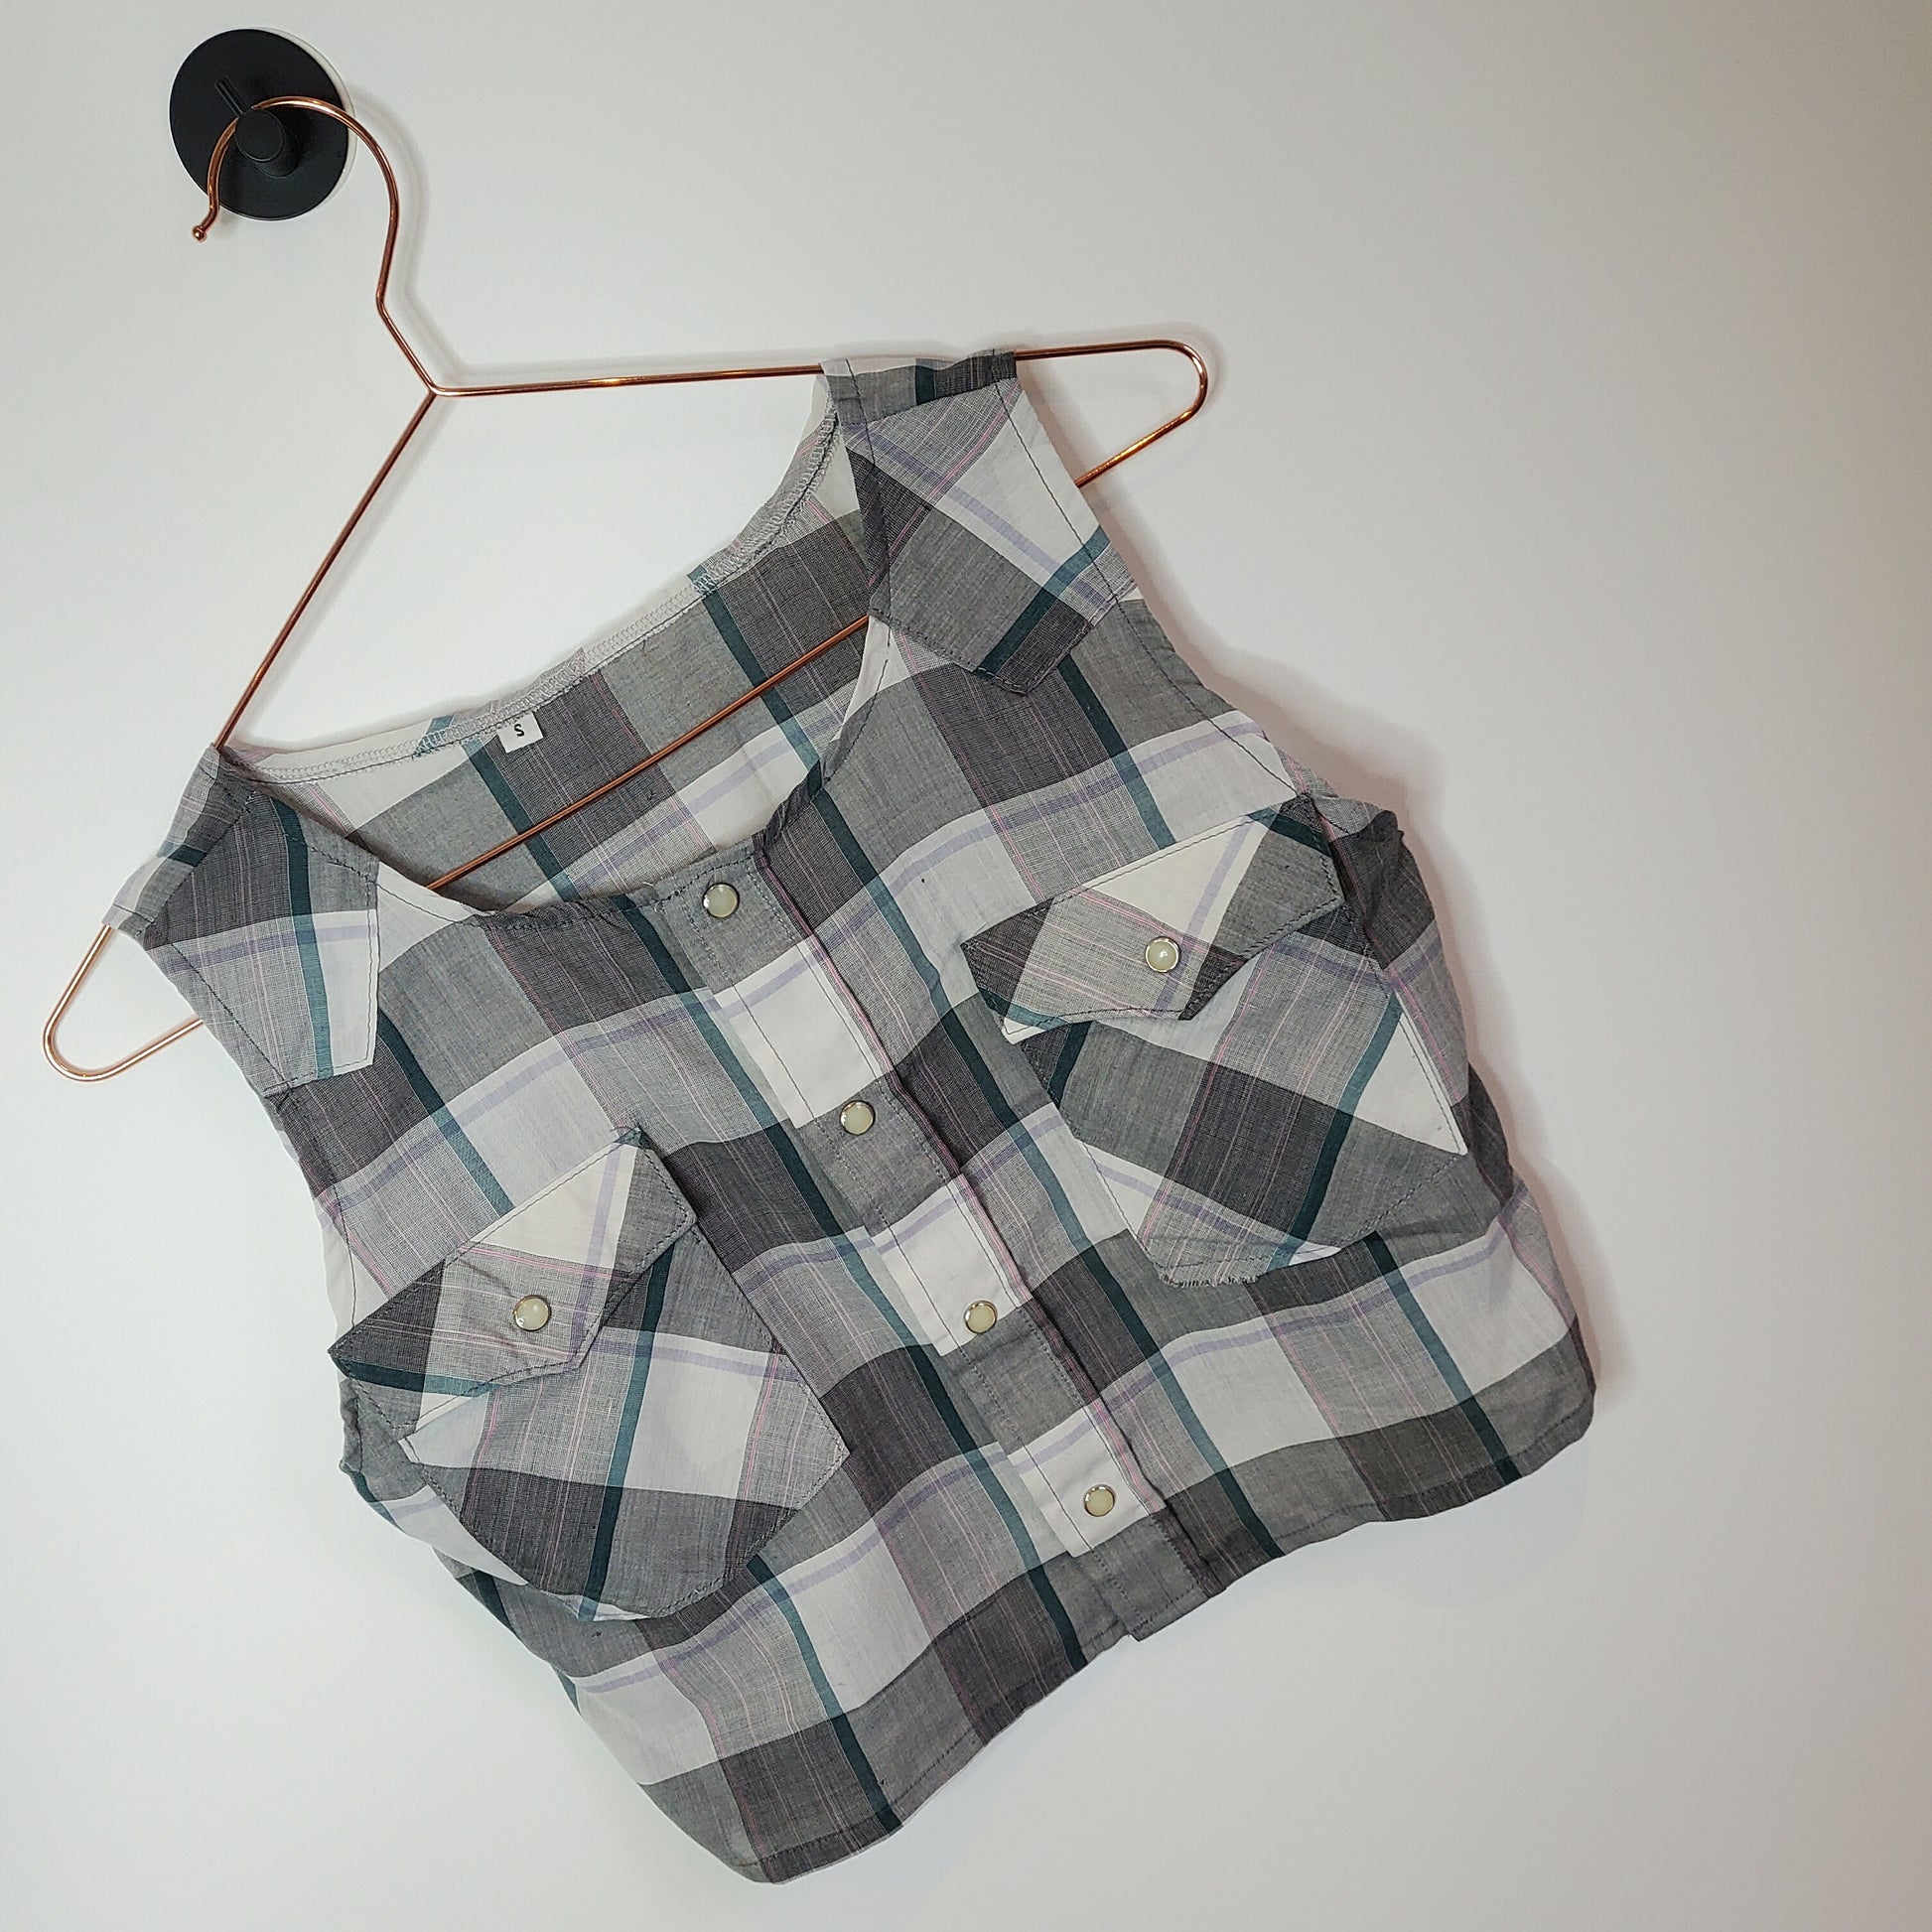 Upcycled Vintage Checked Crop Top Black and White Size 8-10